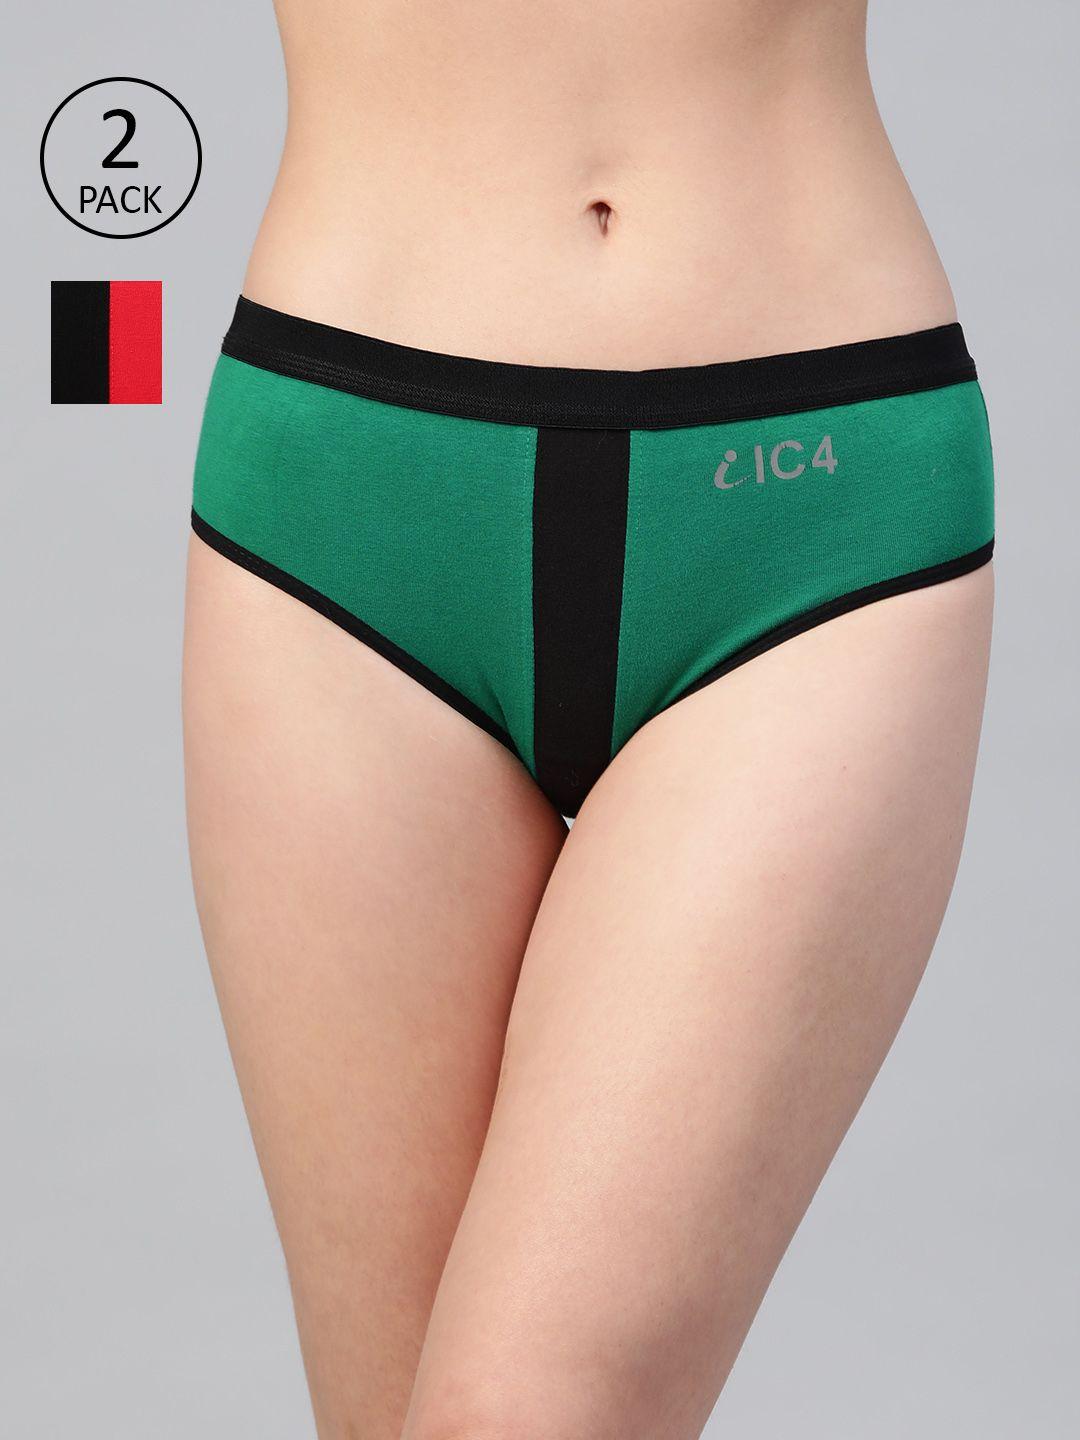 ic4 women pack of 2 striped hipster briefs 0br-mb-1005p2